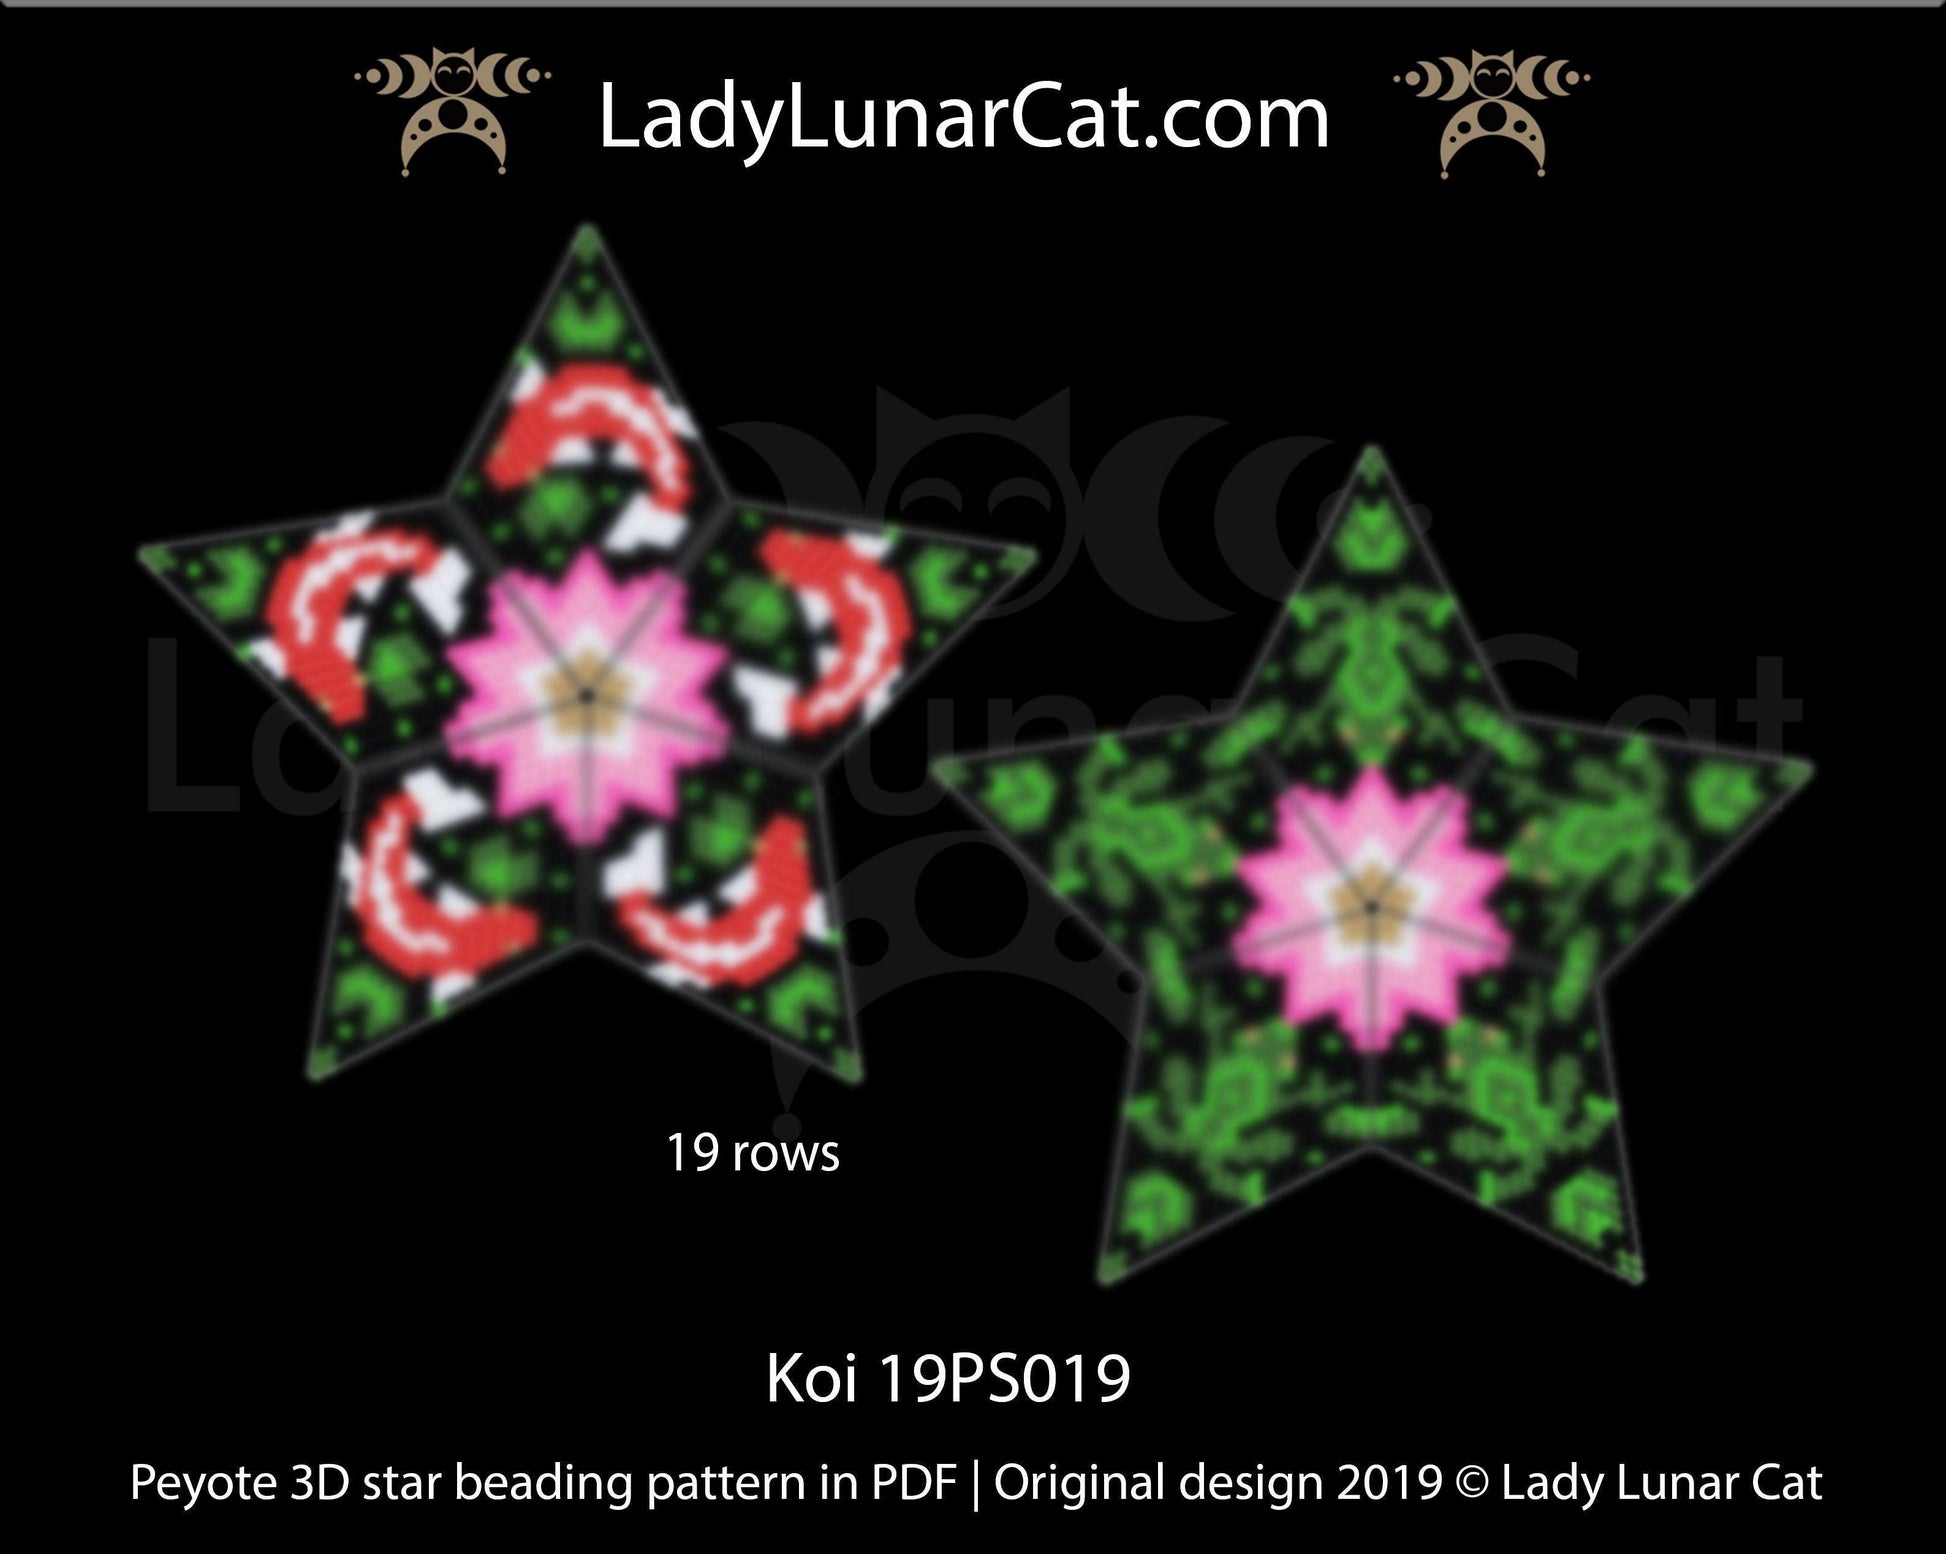 Beaded star pattern for beadweaving  Koi fish and frogs 19PS019 LadyLunarCat